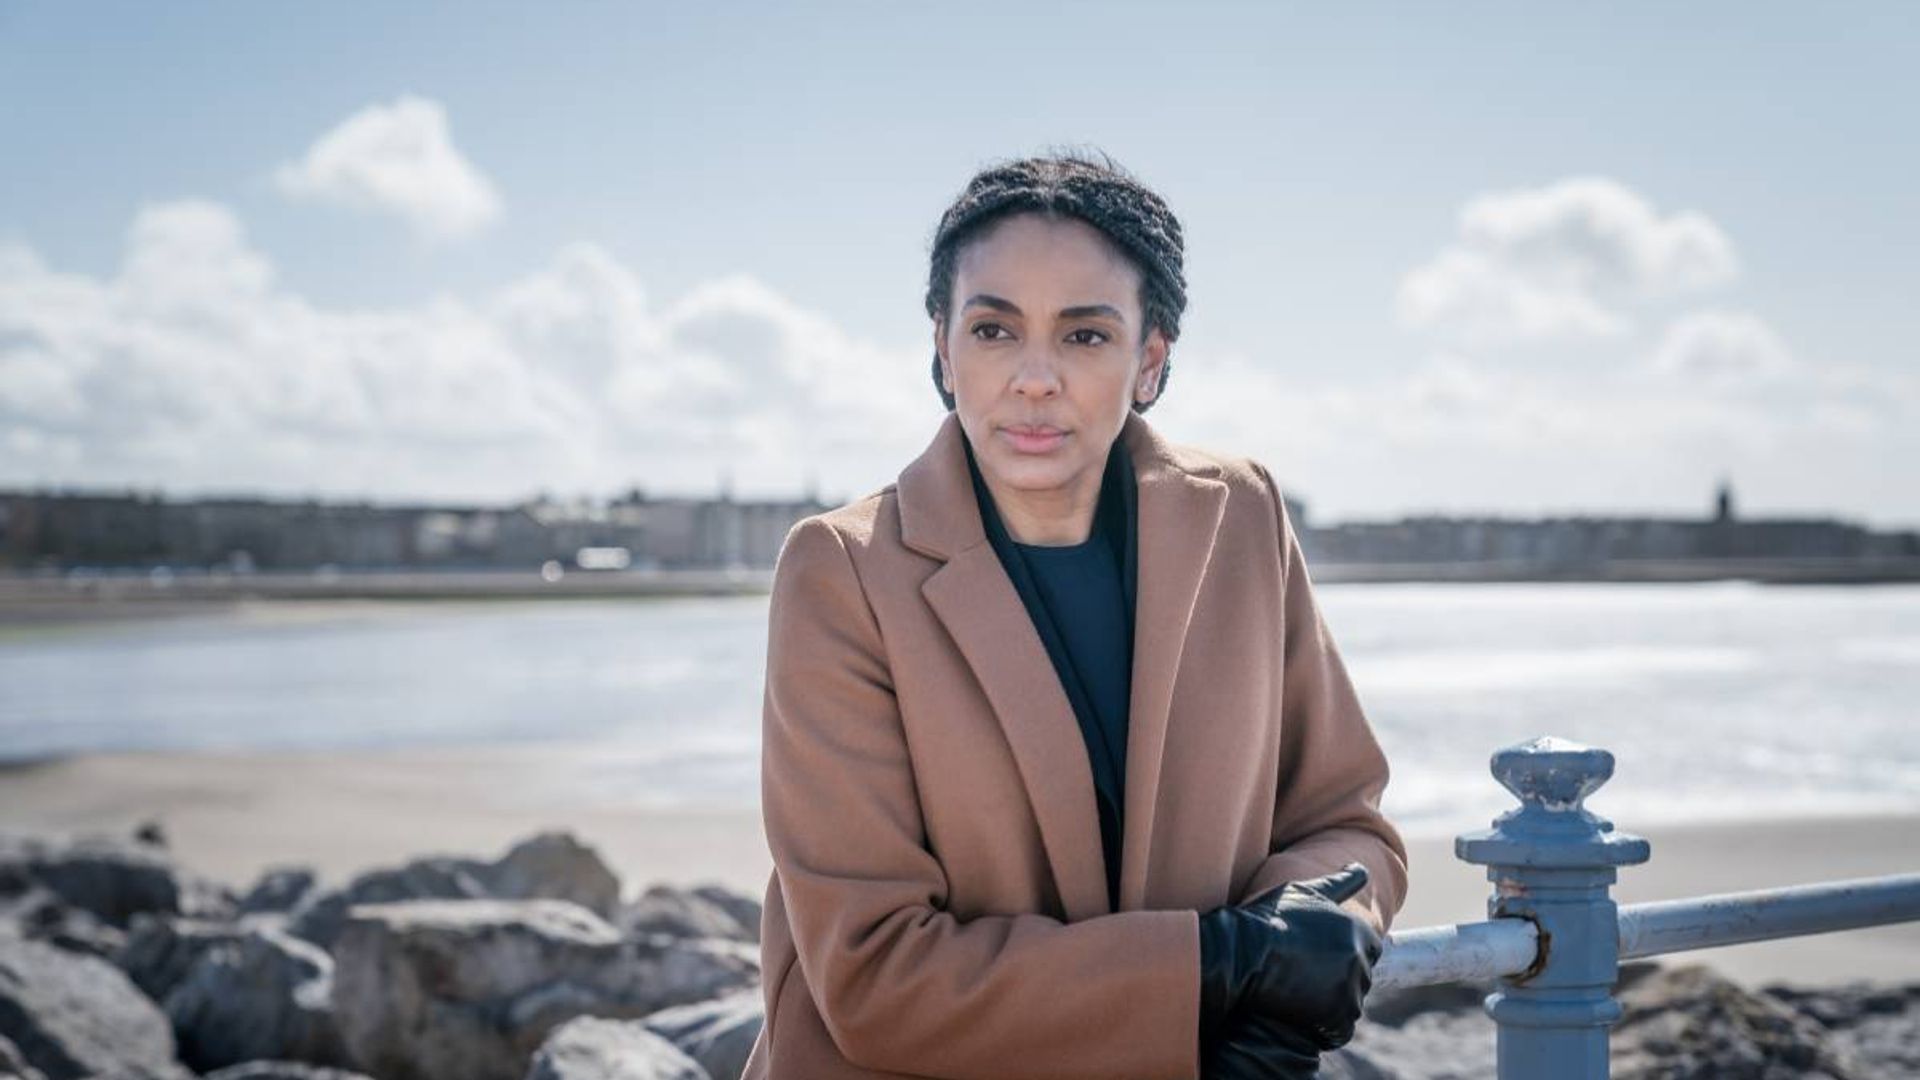 The Bay's Marsha Thomason shares exciting update on season four - exclusive